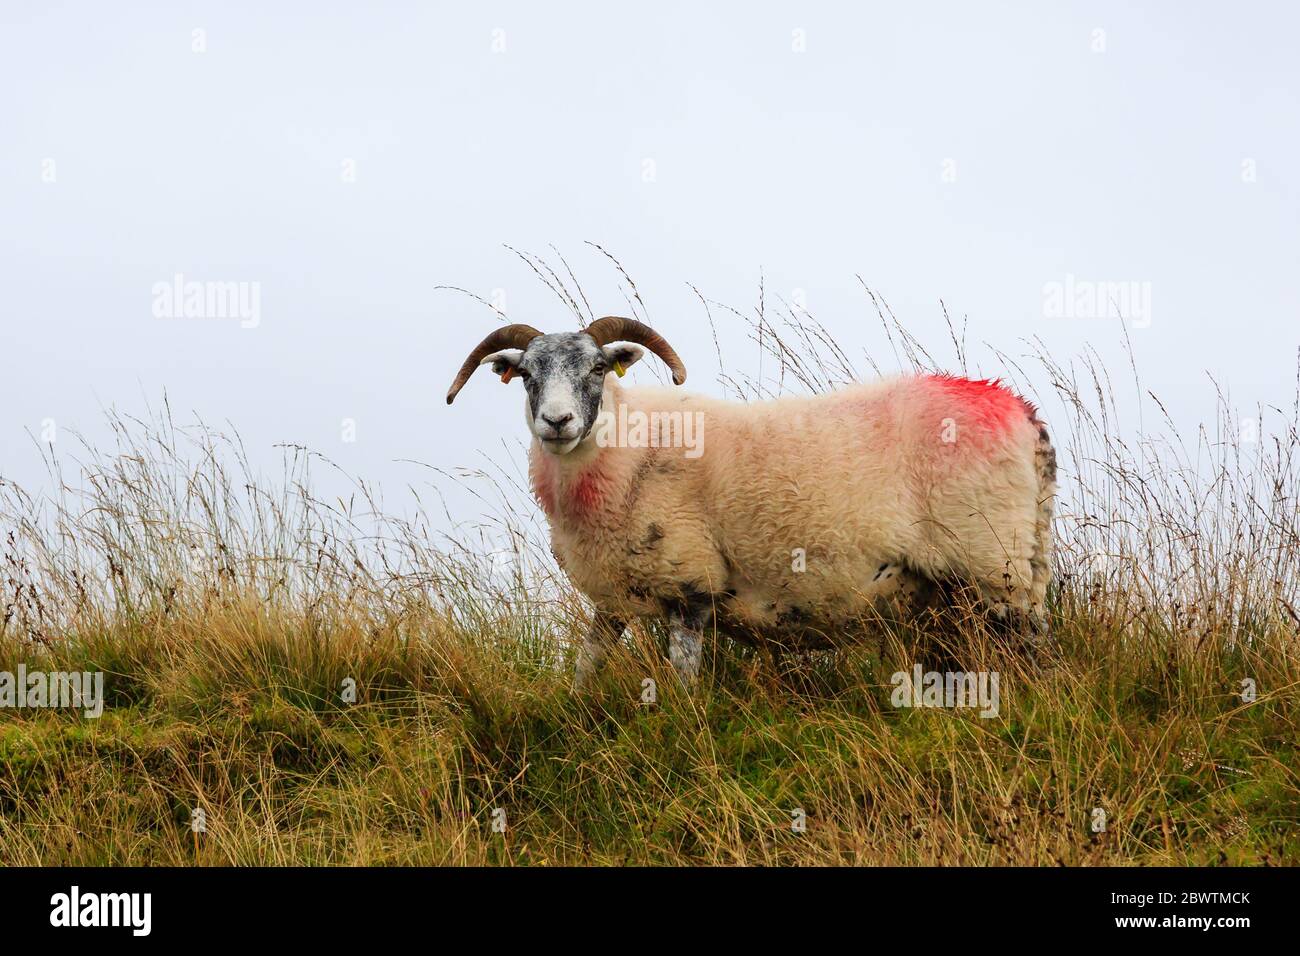 Scottish Blackface sheep standing at the top of hill in Scotland Stock Photo